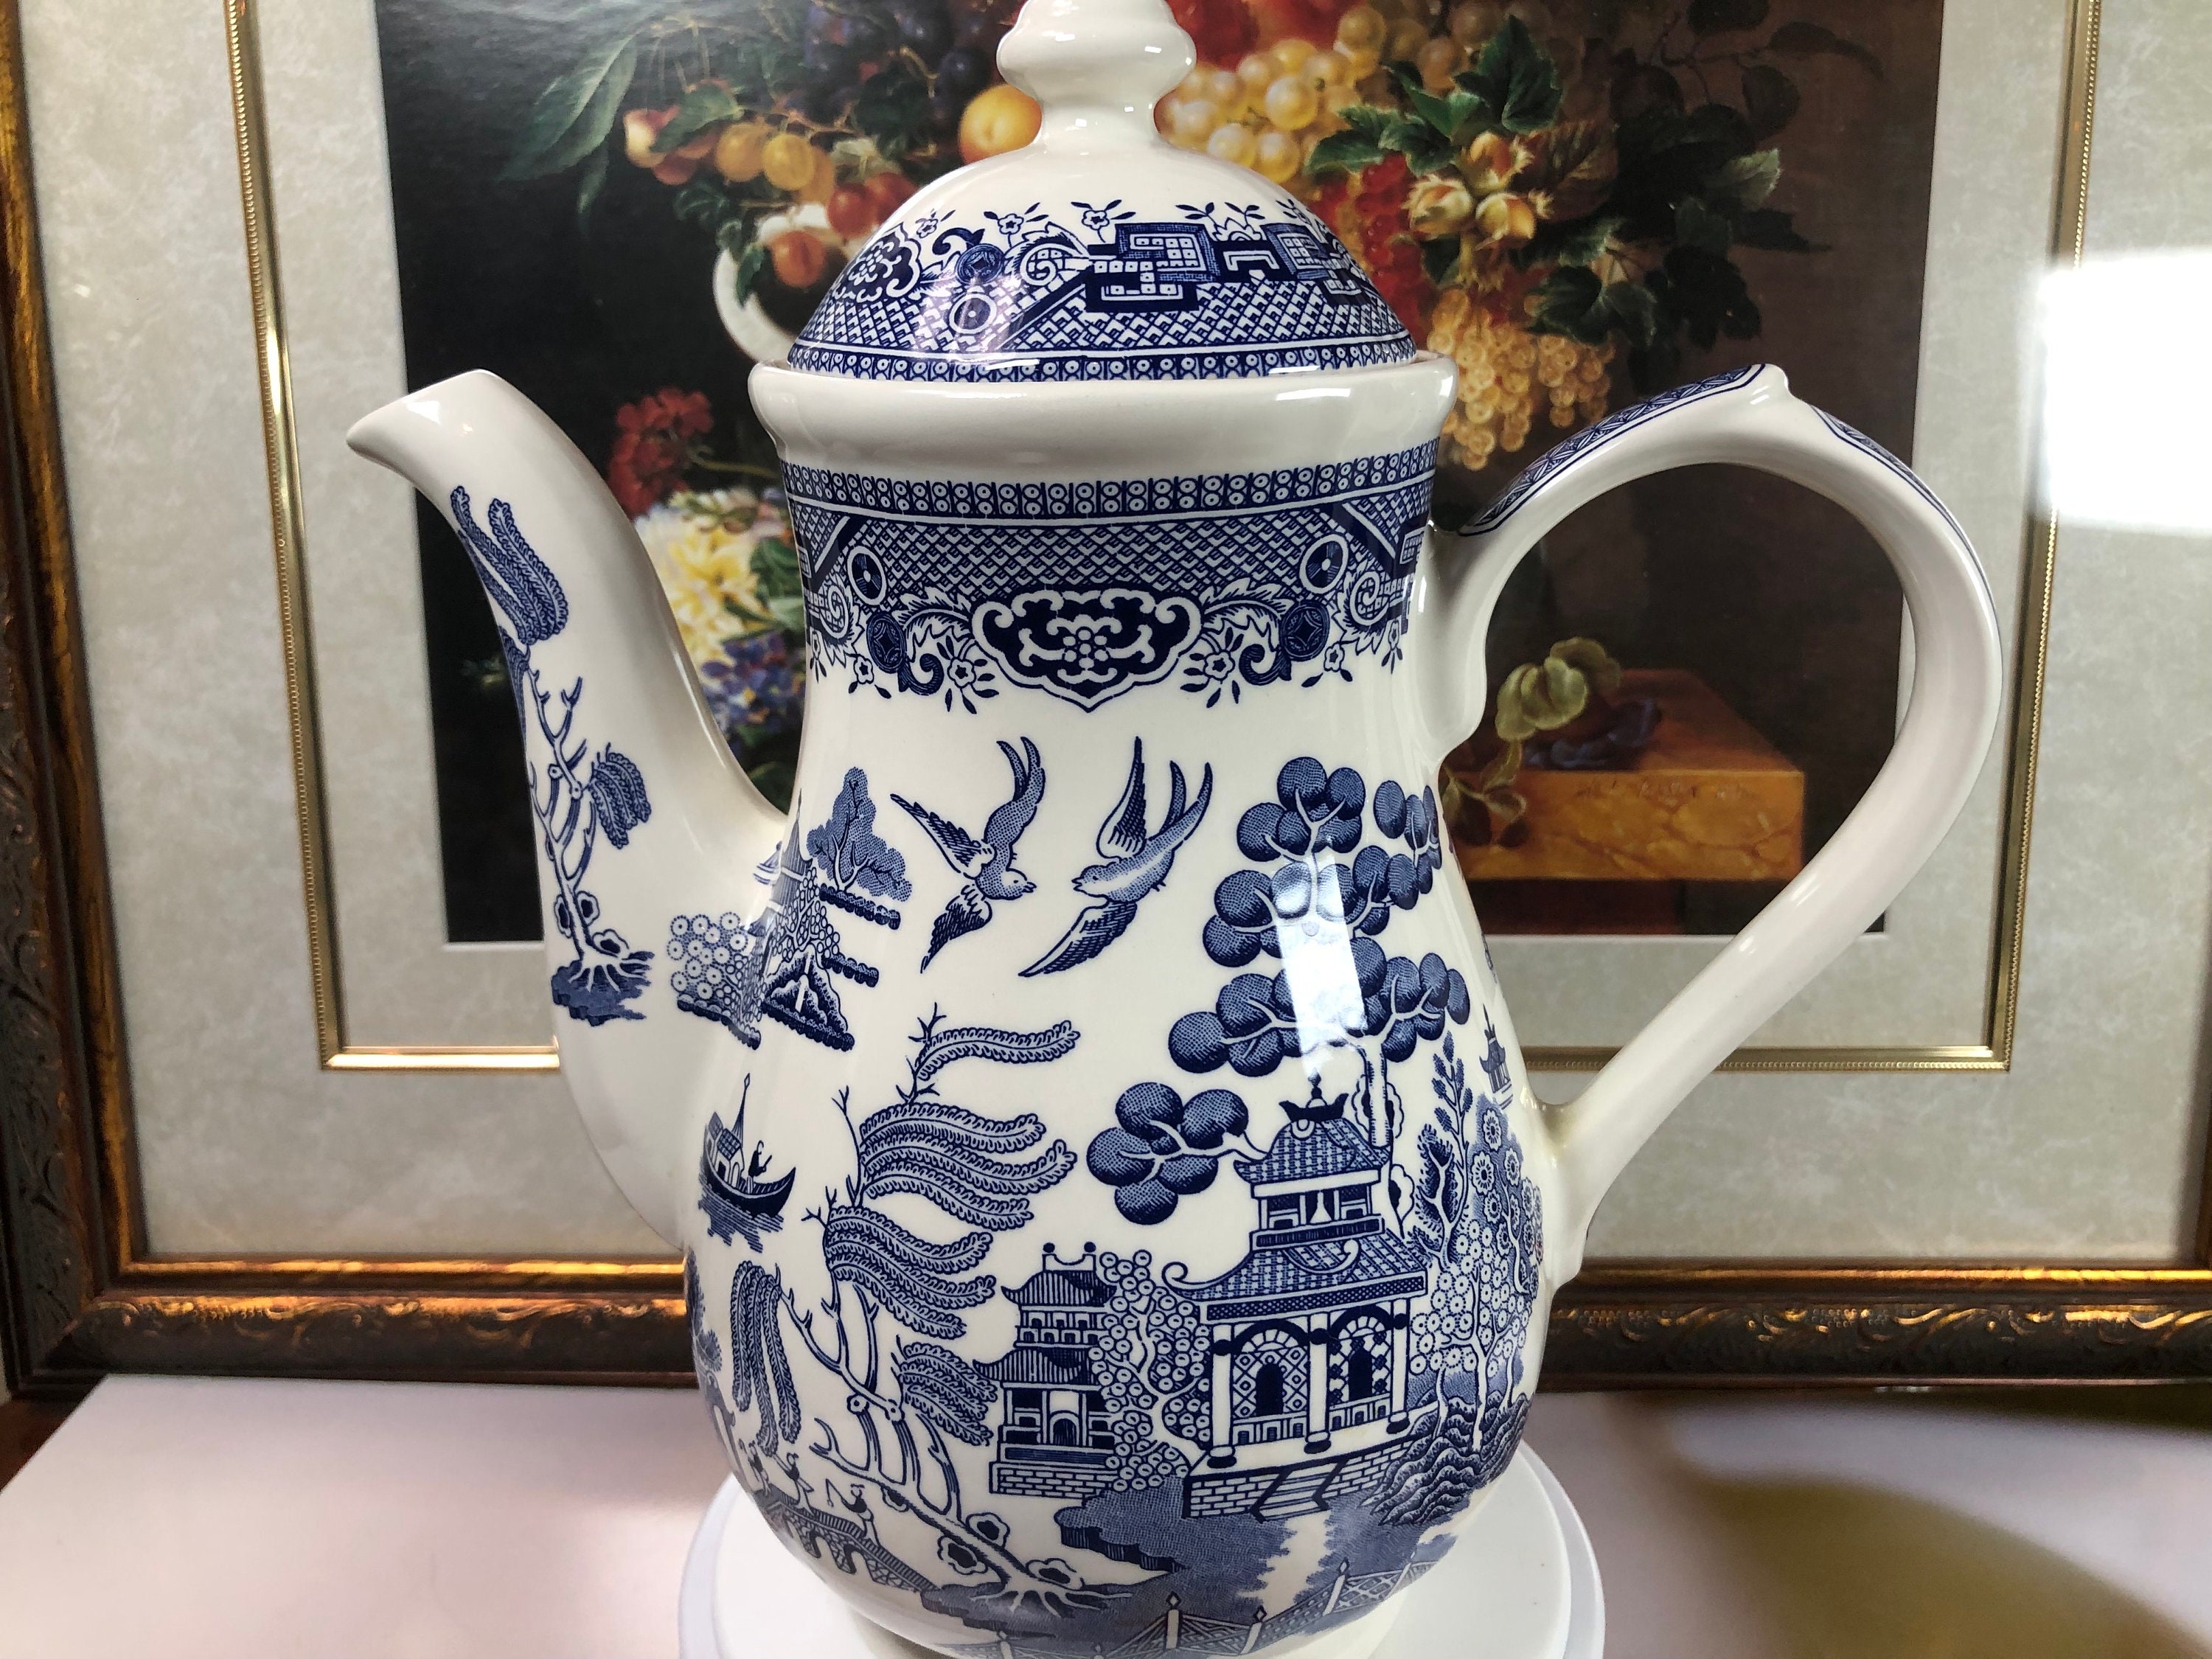 Blue Willow Dishes, Unique Teapot, Delft Blue, Calamityware :Things Could Be Worse Porcelain Chinaware, Antique Art Mugs, Teapot+Sugar & Creamer+4